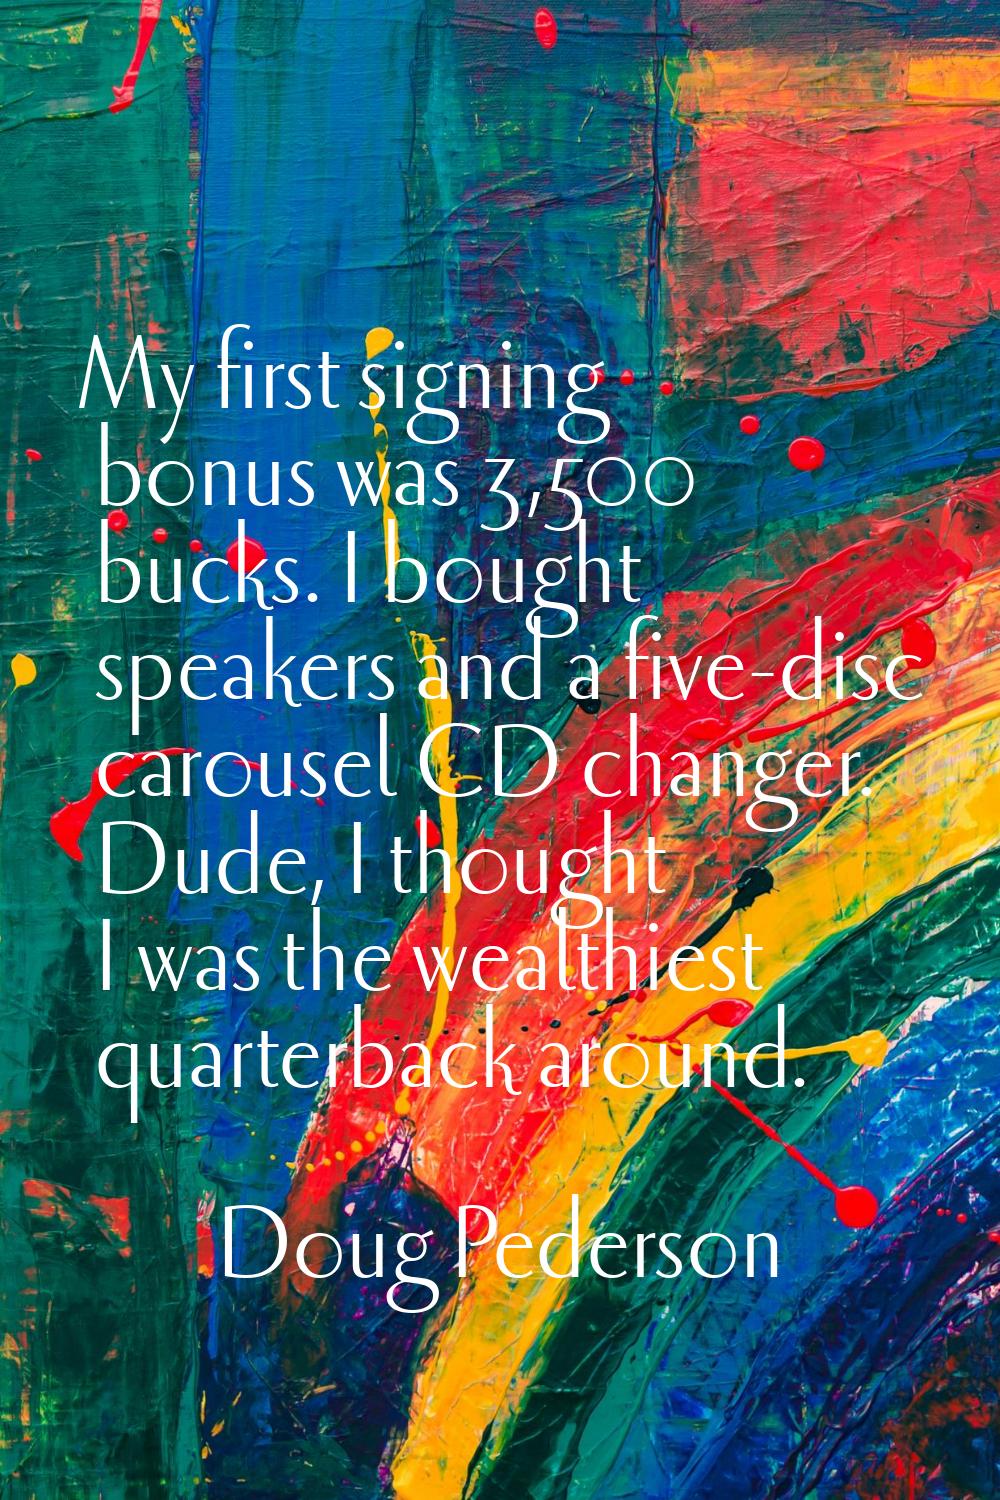 My first signing bonus was 3,500 bucks. I bought speakers and a five-disc carousel CD changer. Dude